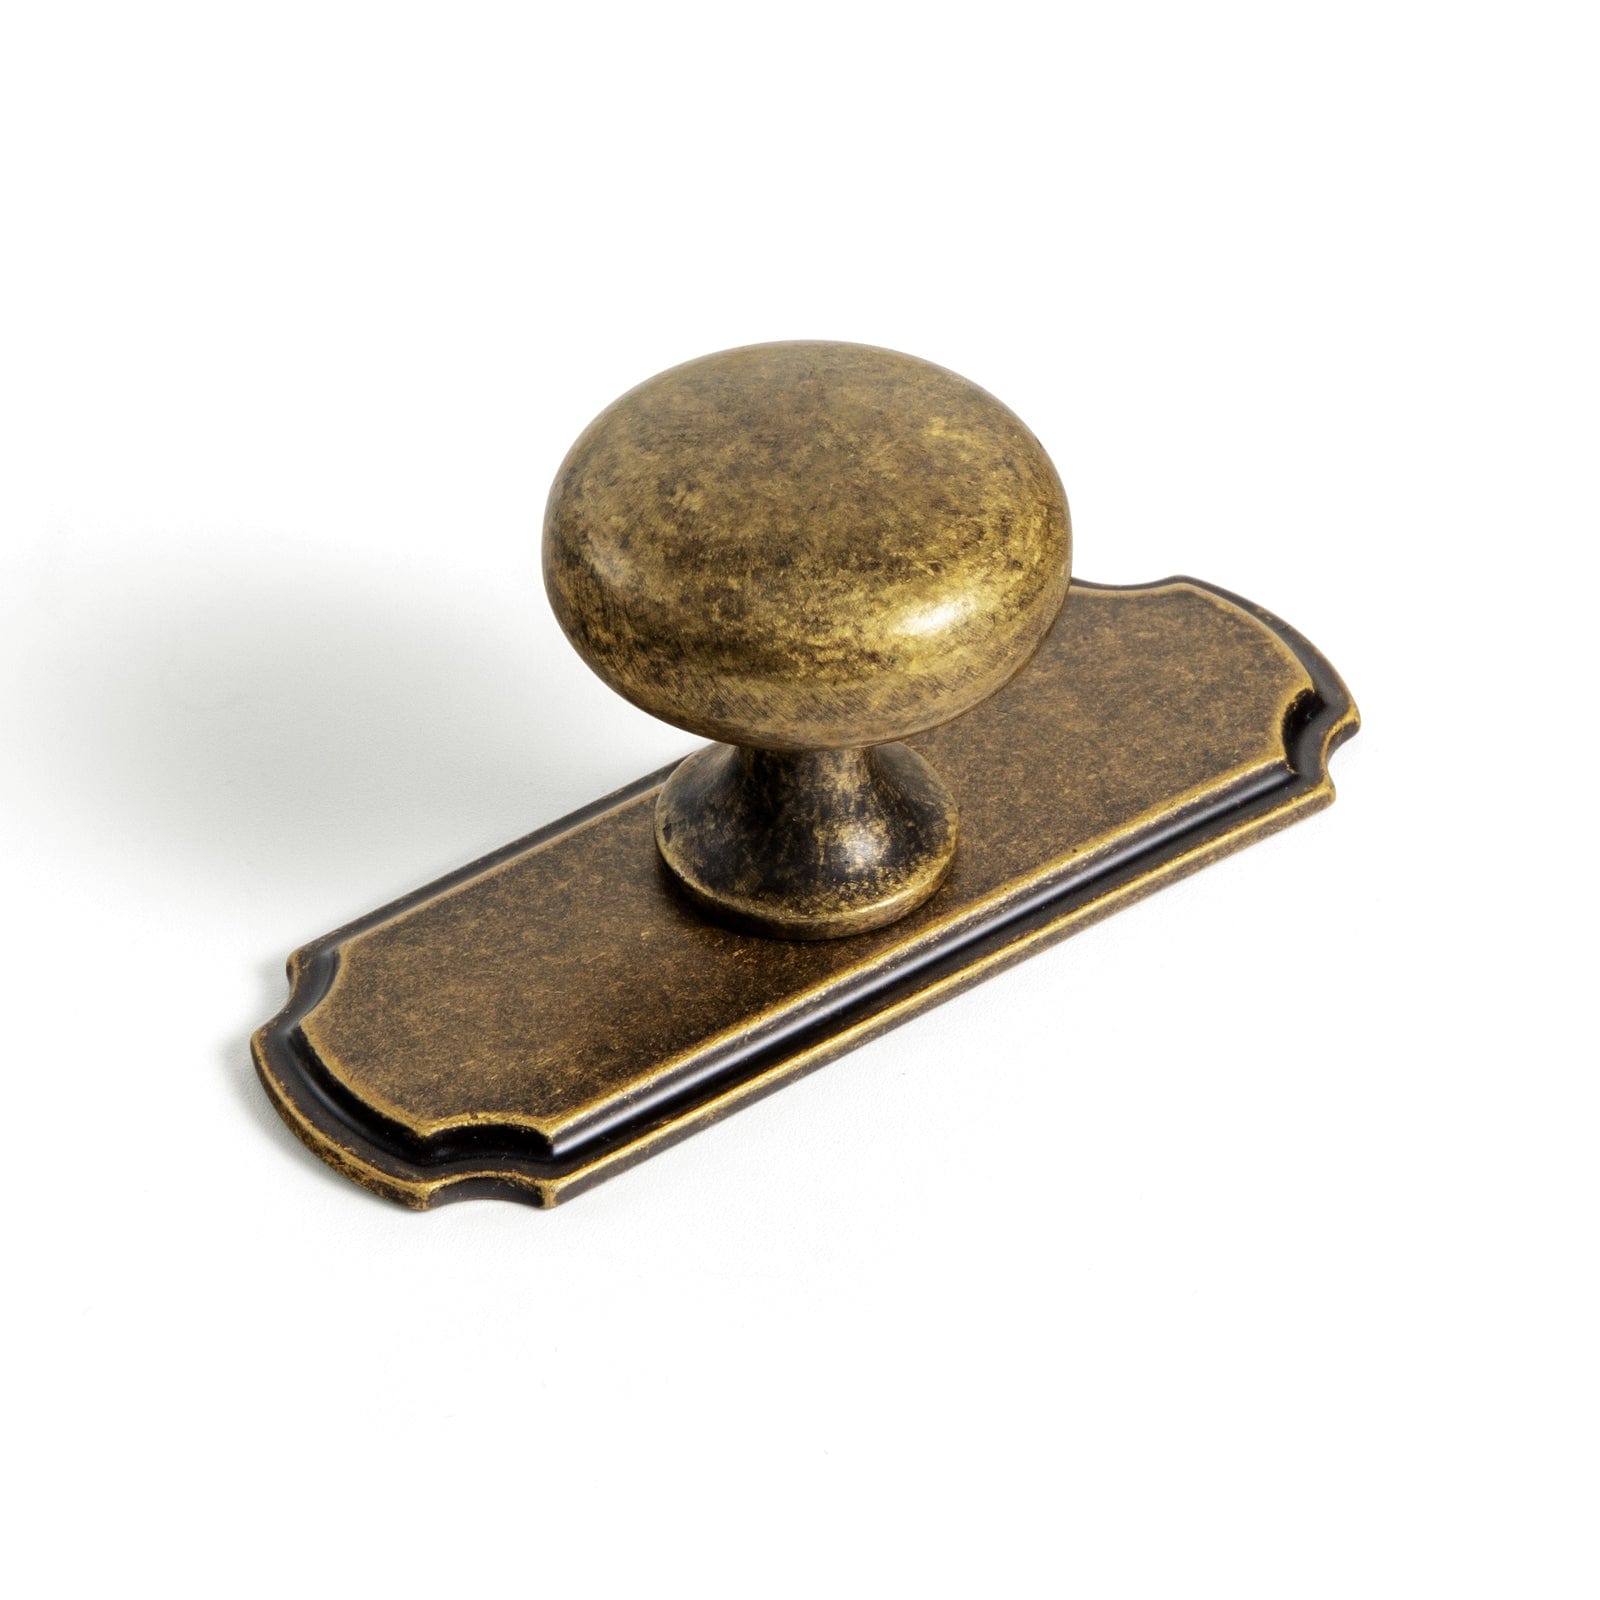 Goo-Ki Antique Brass / Knob With Back Plate / 6 Pack Retro Durable Cabinet Pulls Luxurious Drawer Pulls for Bedroom Kitchen